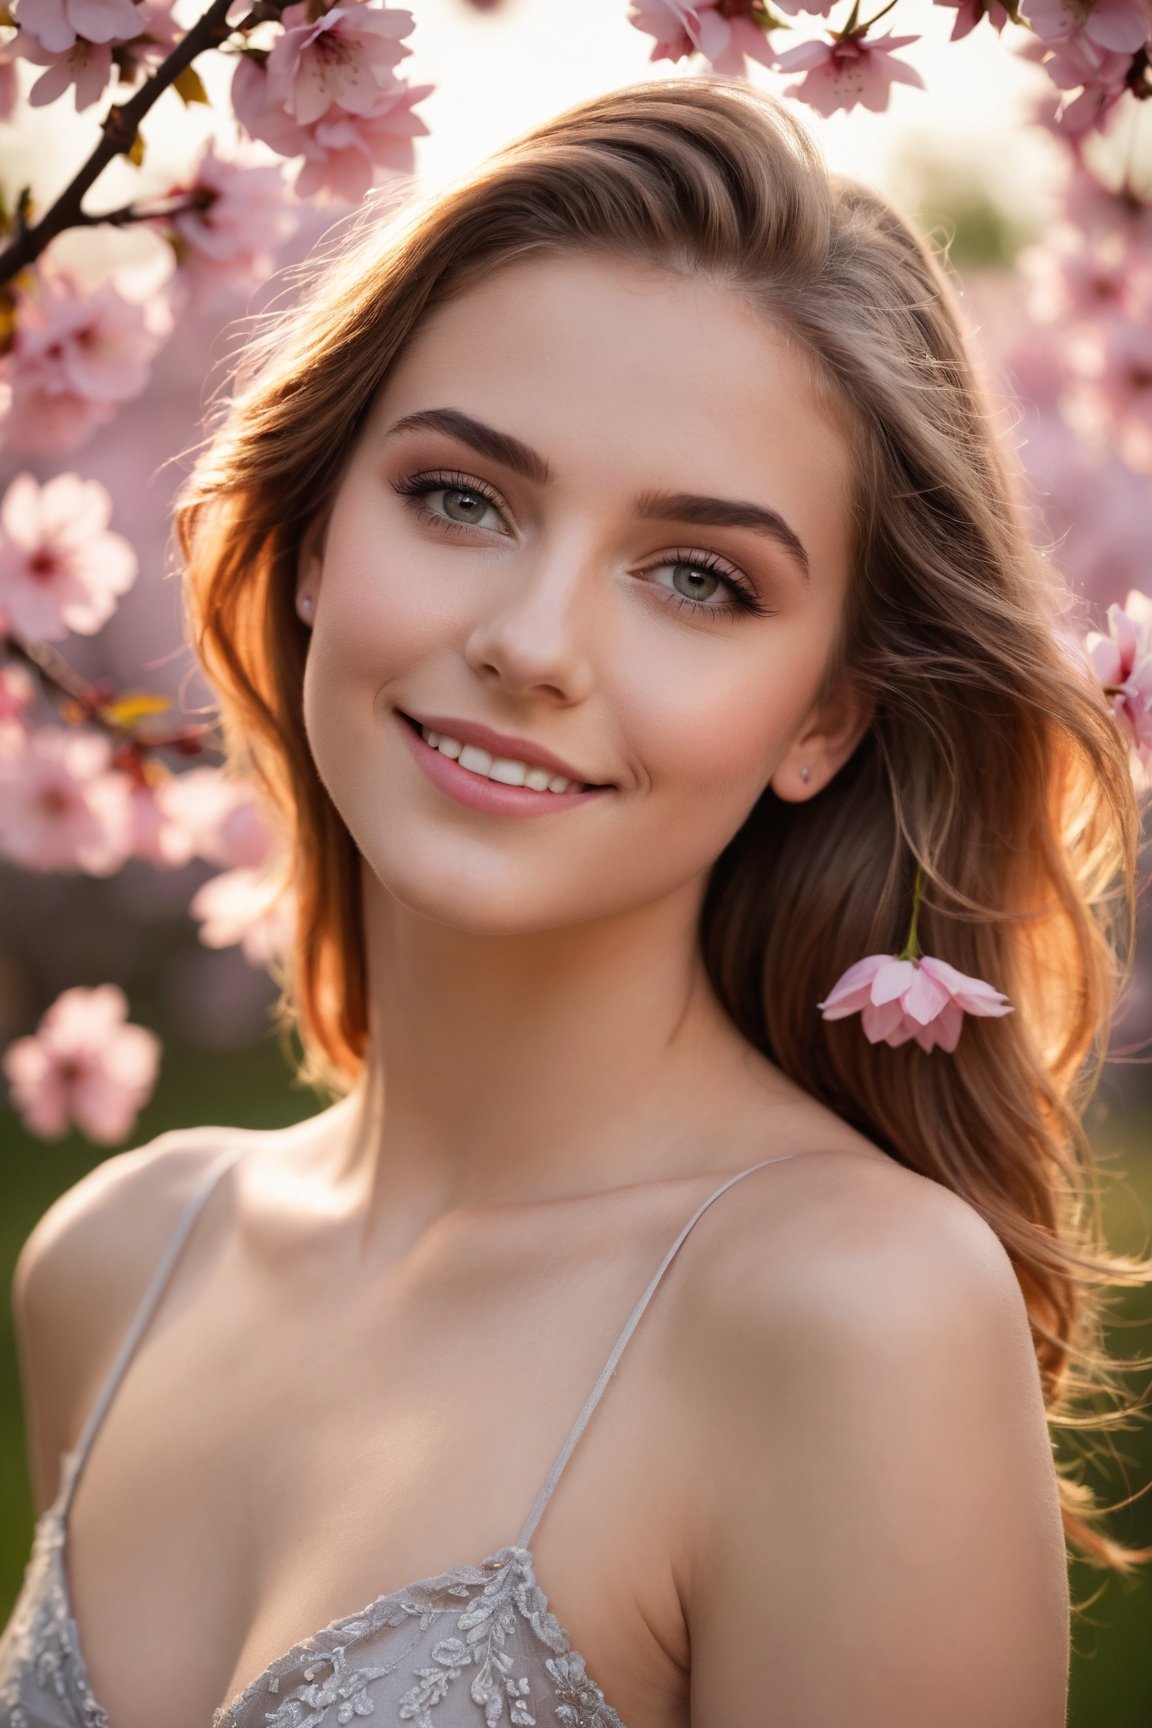 award winning photography of a stunningly beautiful naked 19-year-old girl, head tilt, tilting the head with a coy smile, conveying playfulness and charm, steel gray eyes, edgy makeup , copper slicked-back hair hair, affection, soft lighting, gentle, diffused light that wraps the characters in a warm and dreamy glow, in a blooming cherry blossom grove, with delicate pink petals floating in the breeze, remarkable color, ultra realistic, shot with cinematic camera 